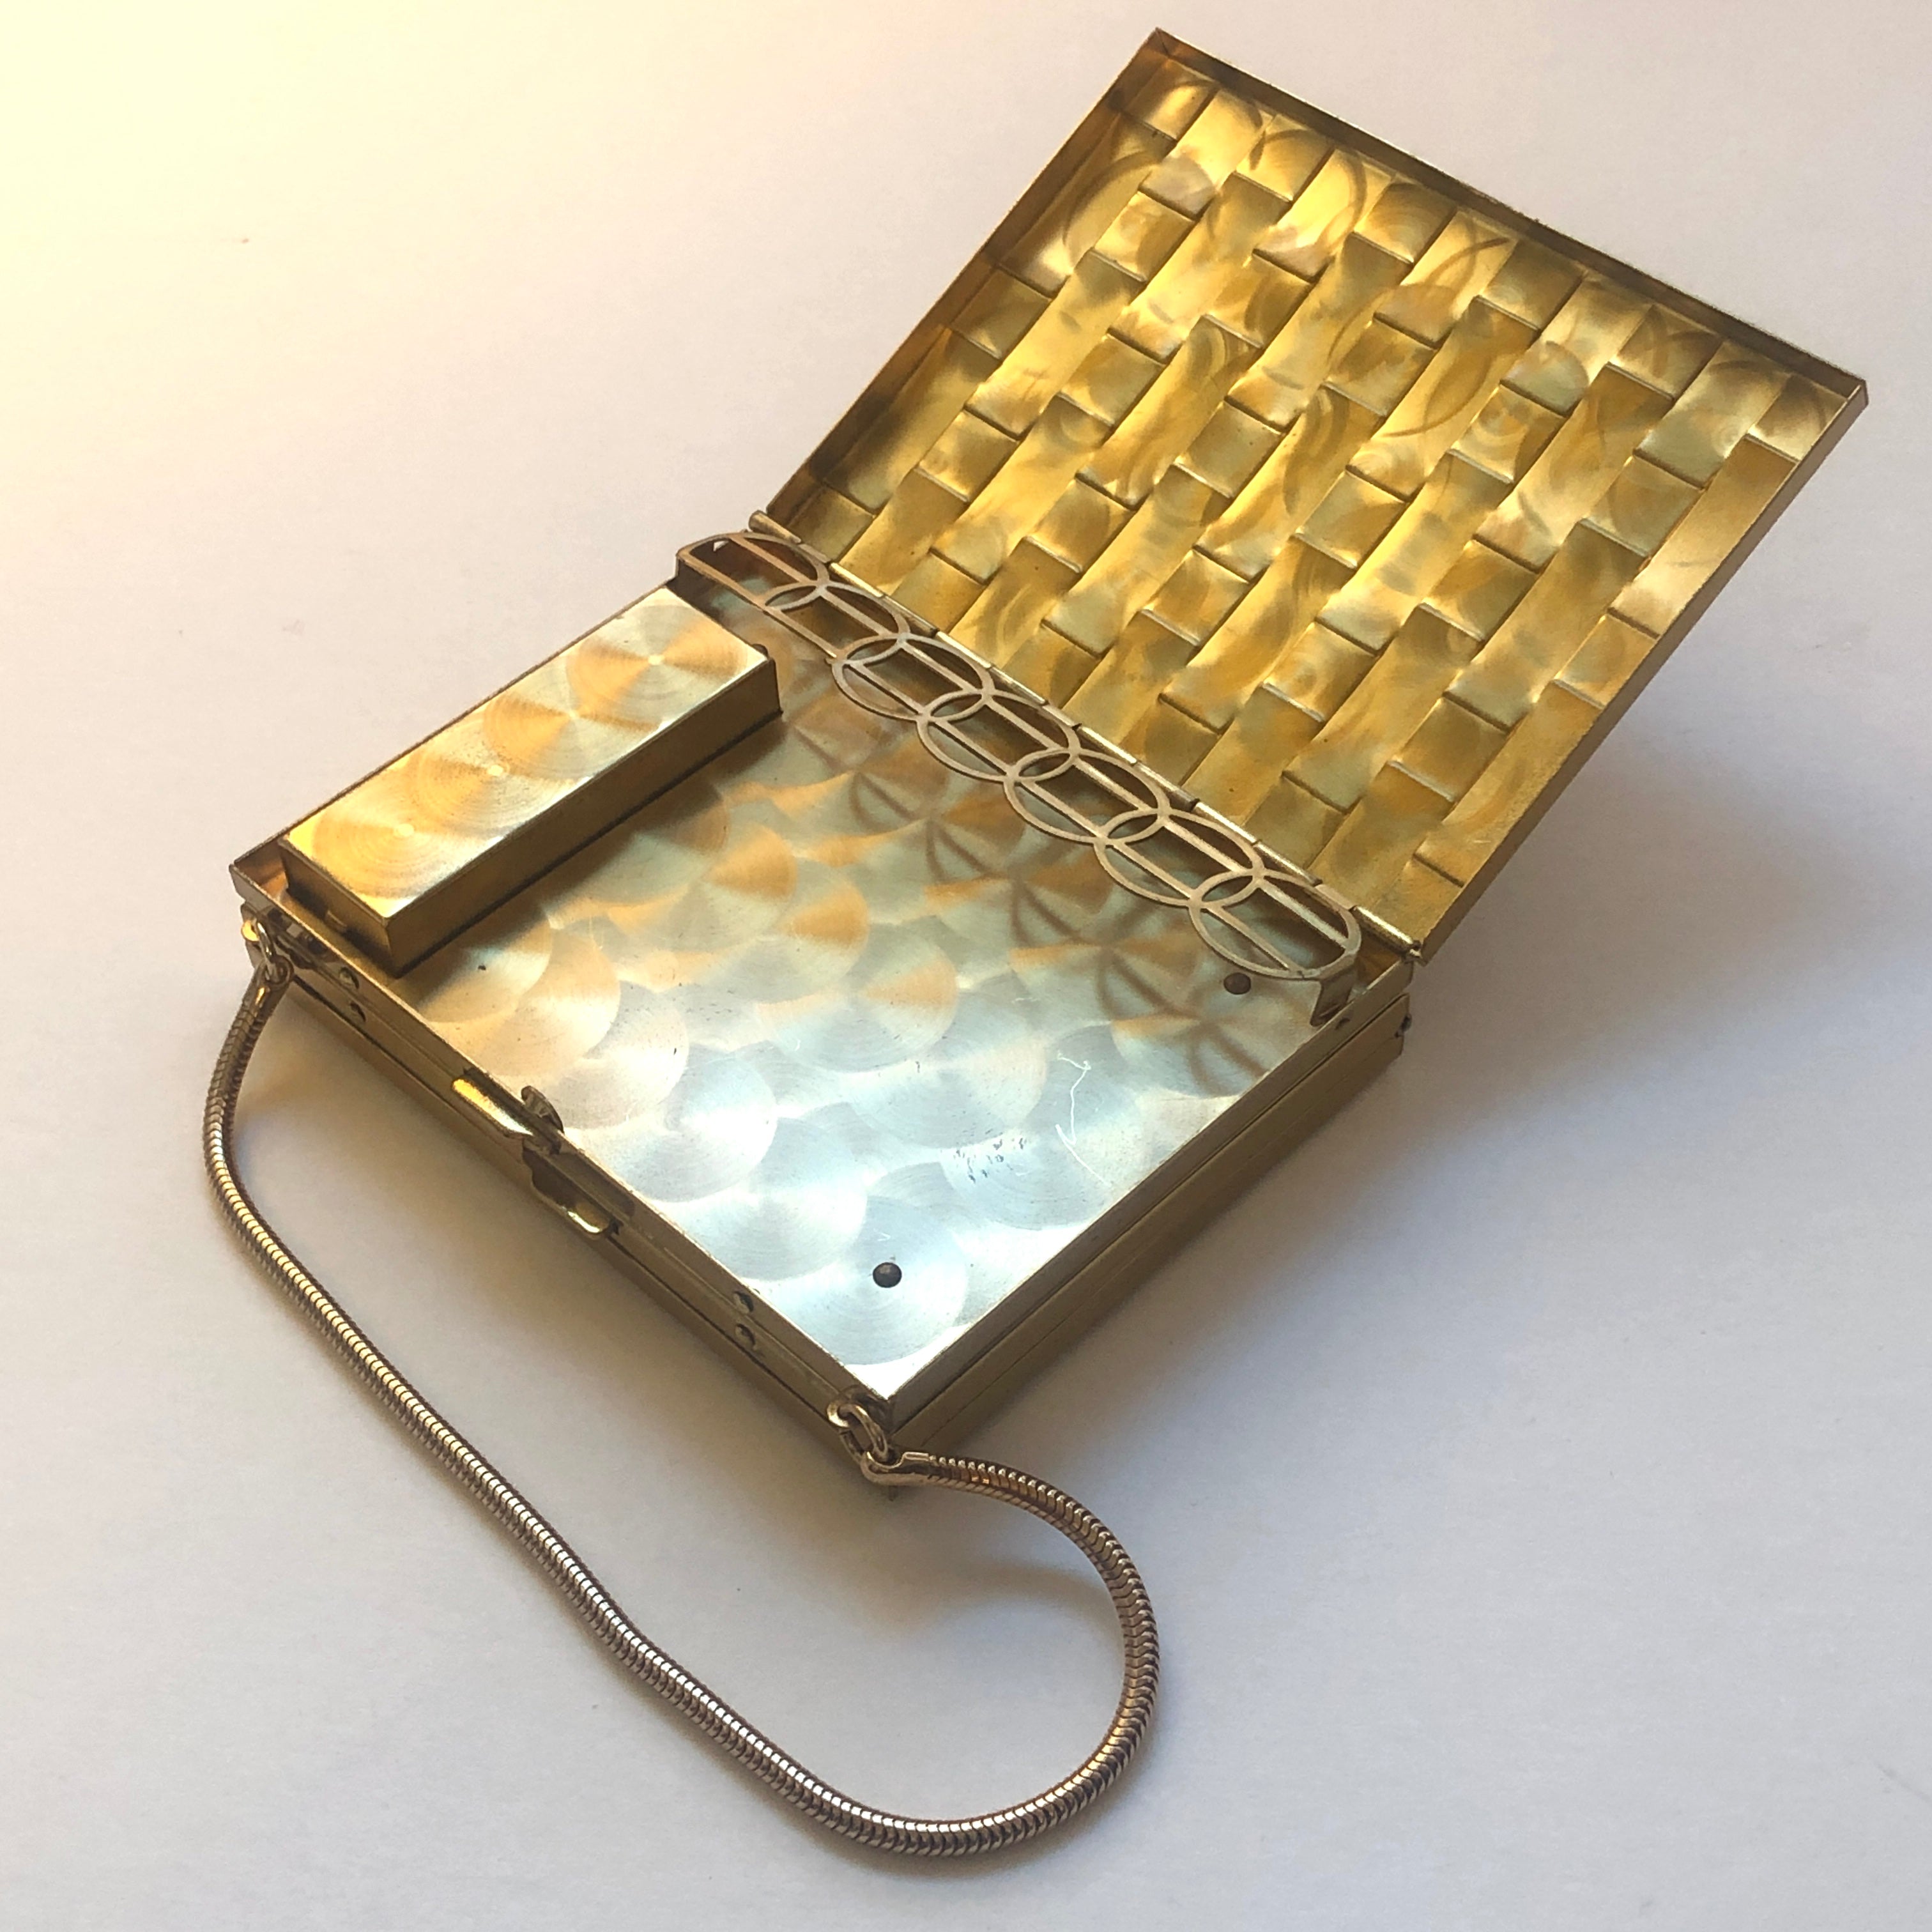 1950’s Woven Gold Tone Metal Combination Compact Cosmetic & Cigarette Case with Chain Handle